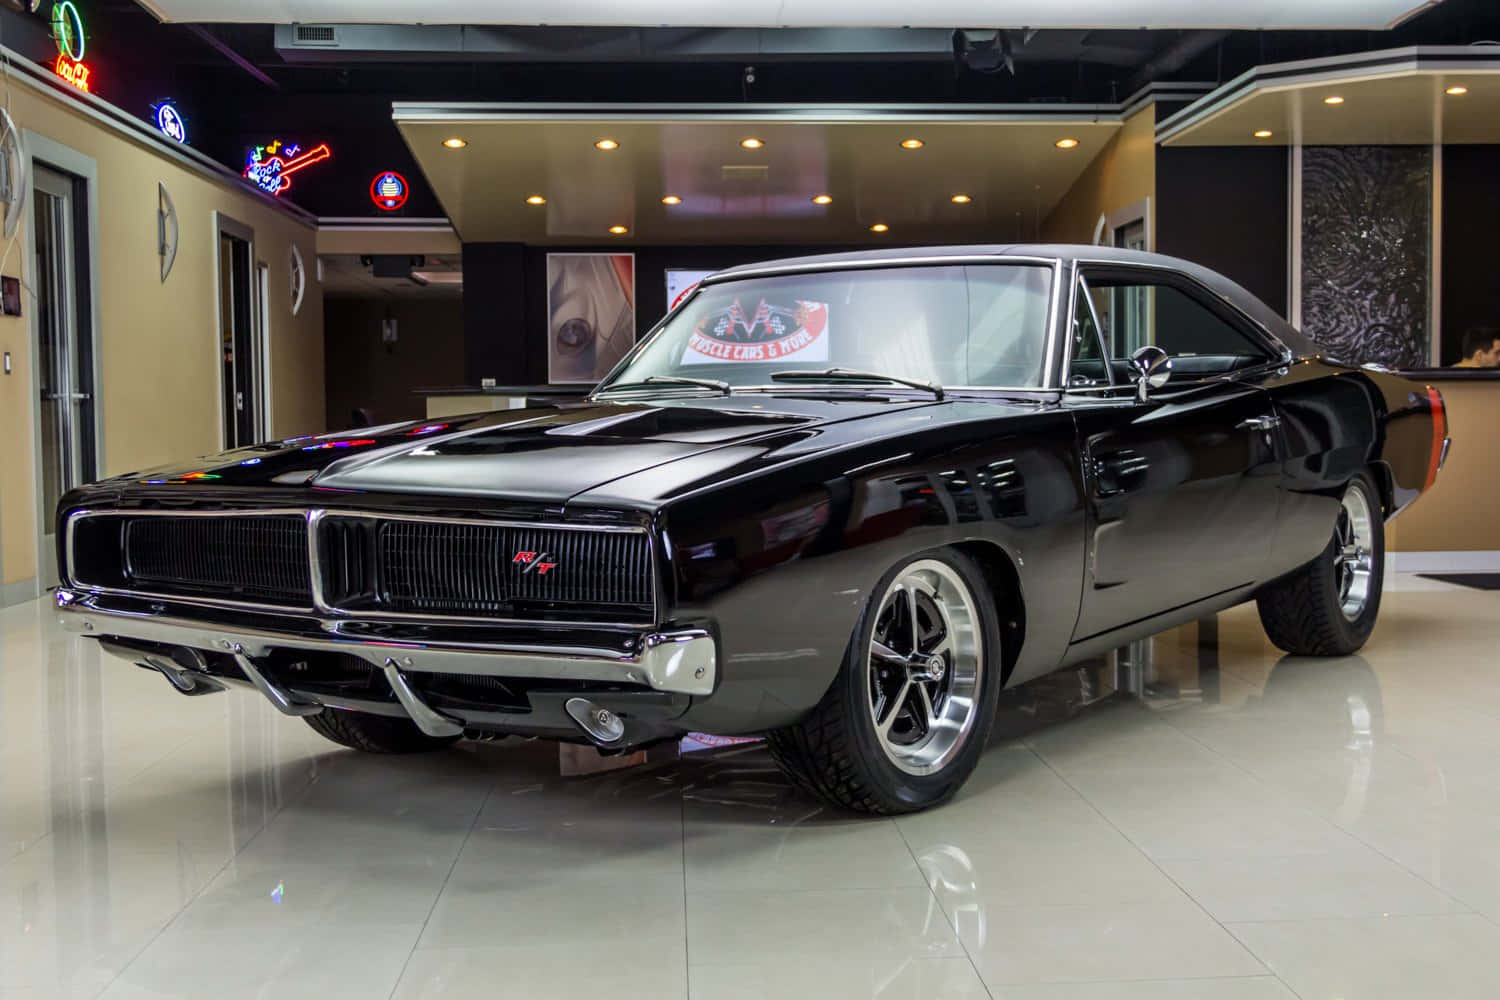 This classic 1969 Dodge Charger lets you relish in its timeless beauty